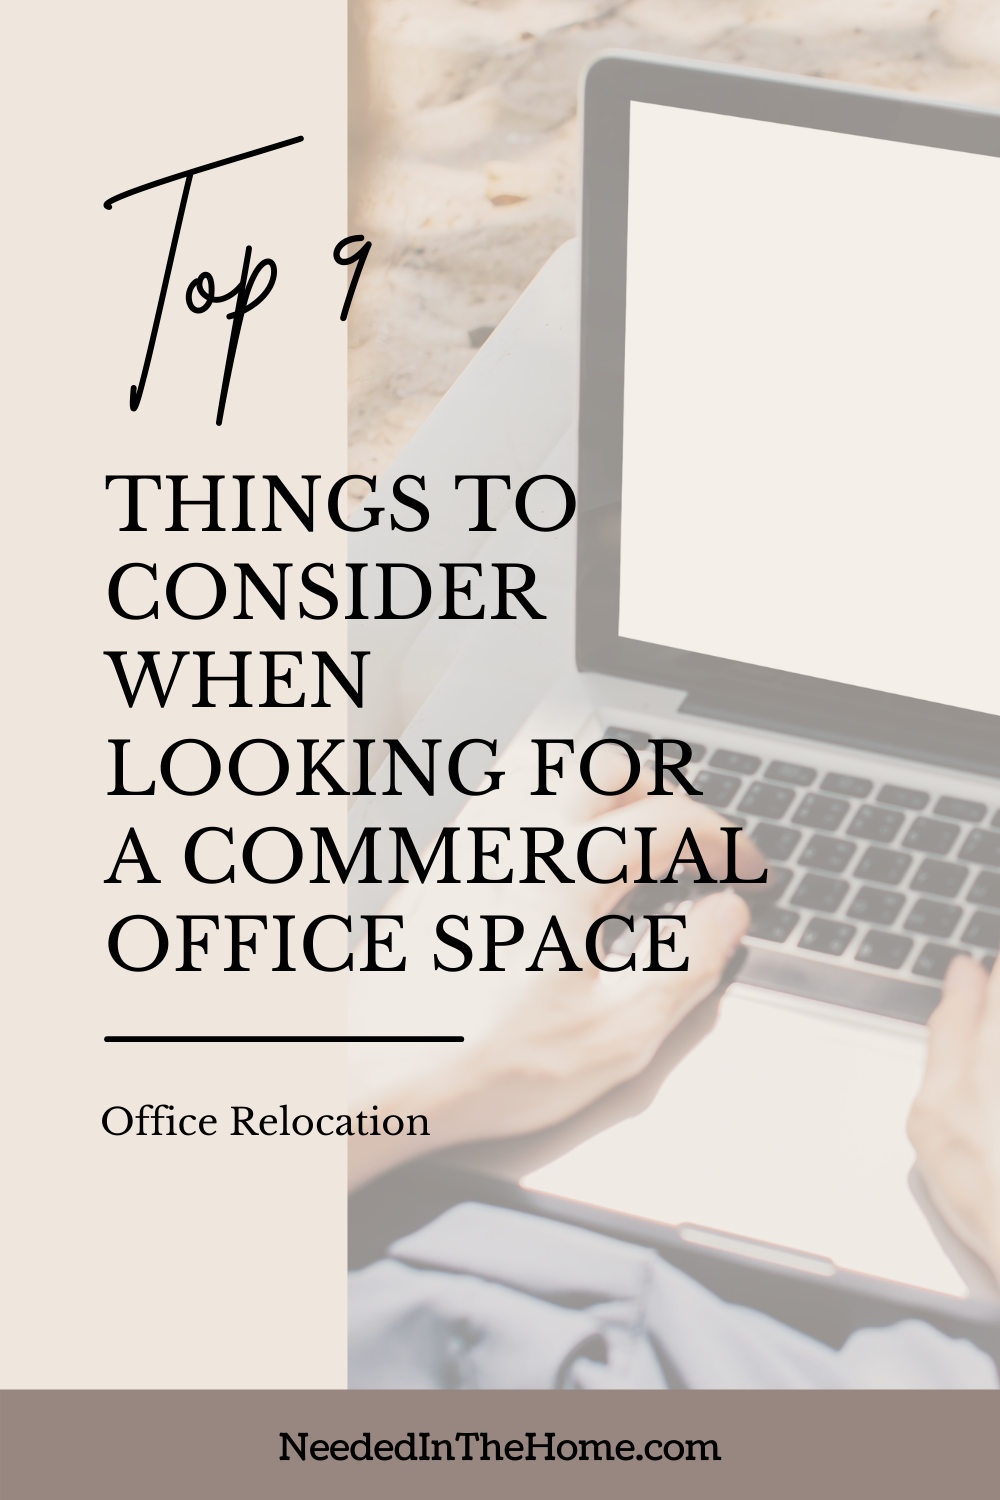 pinterest-pin-description top 9 things to consider when looking for a commercial office space hands typing search on laptop keyboard office relocation neededinthehome